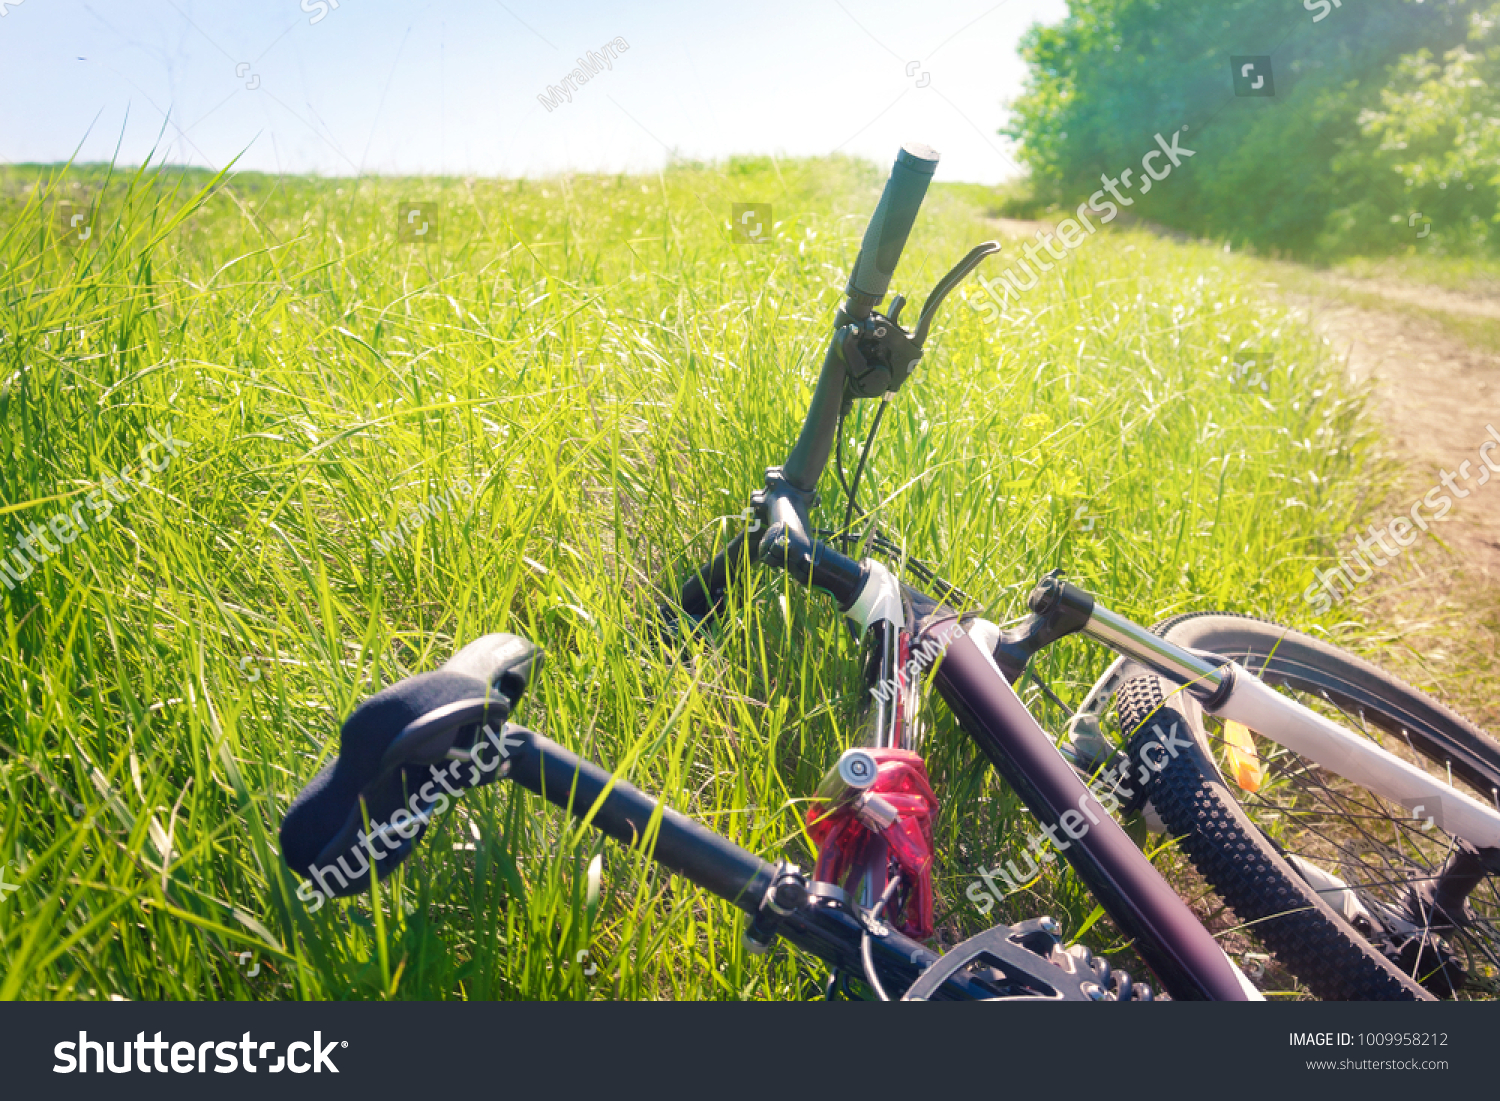 Tired bicycle lying in the grass at the roadside #1009958212